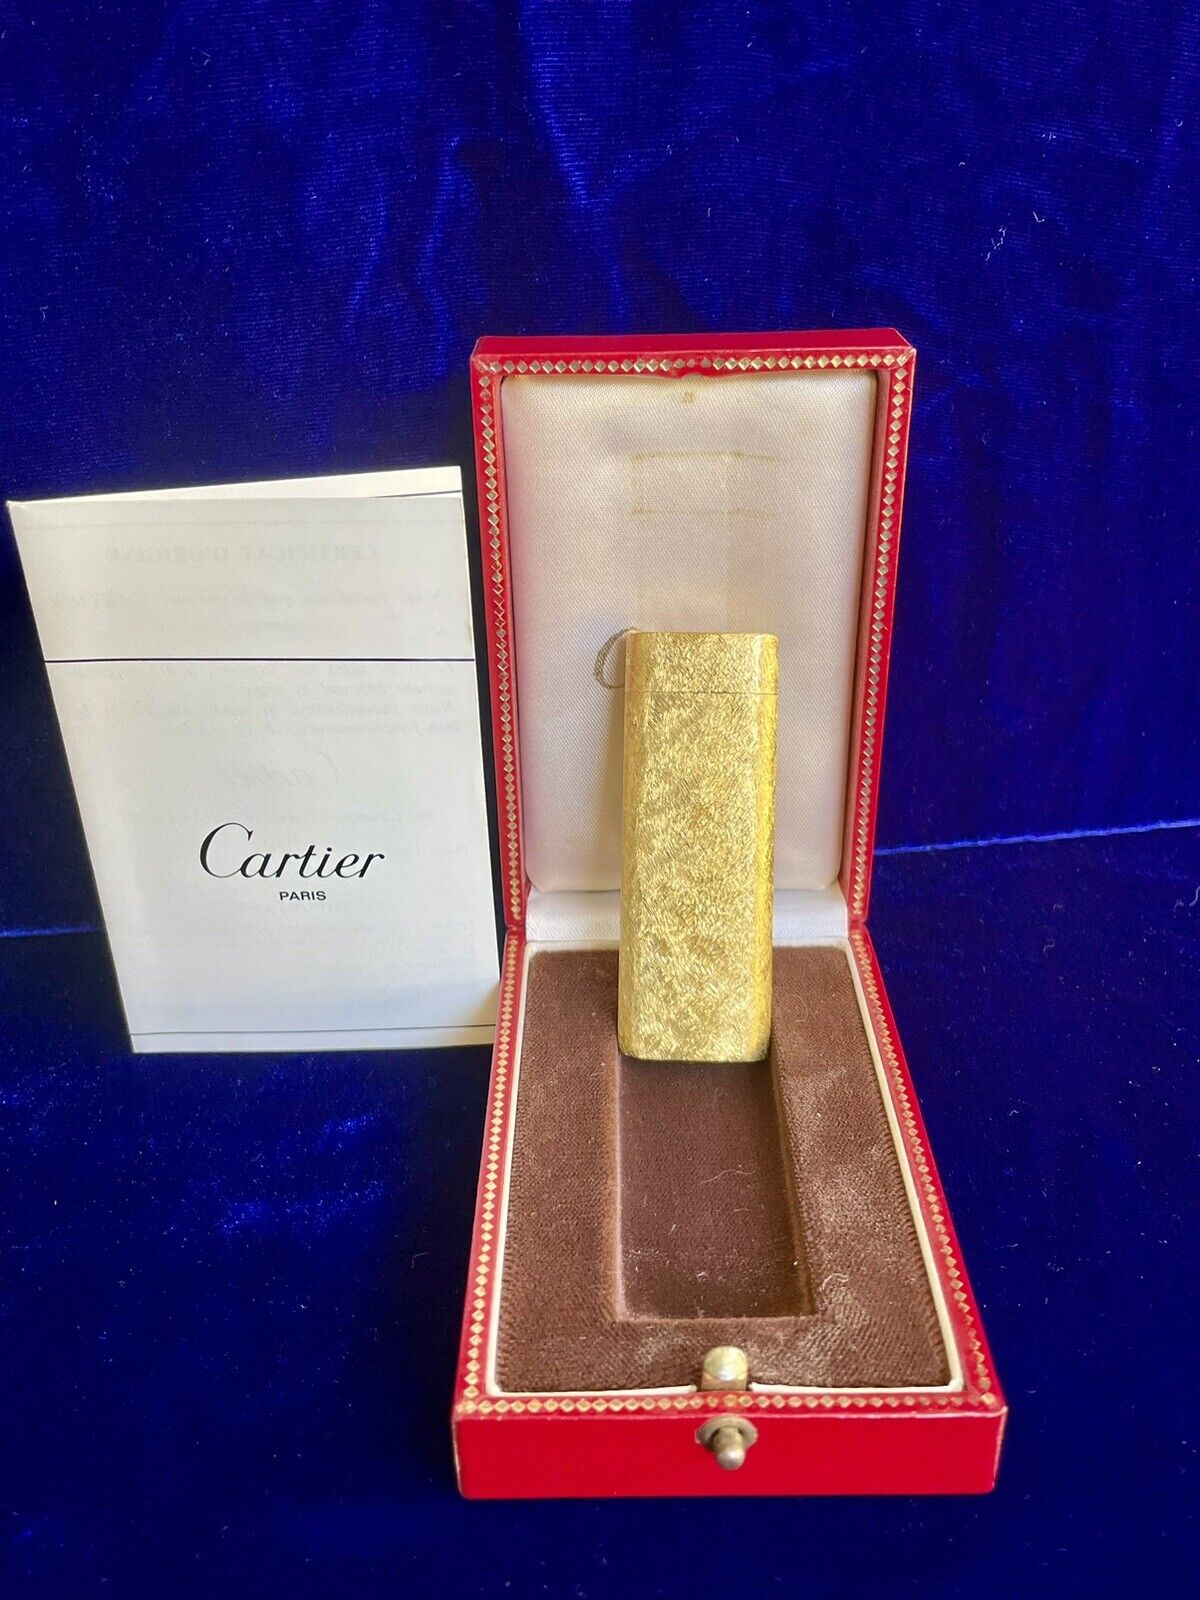 Rare Cartier Lighter Gold Brushed Mint Condition Full Works 1 Year Warranty Box